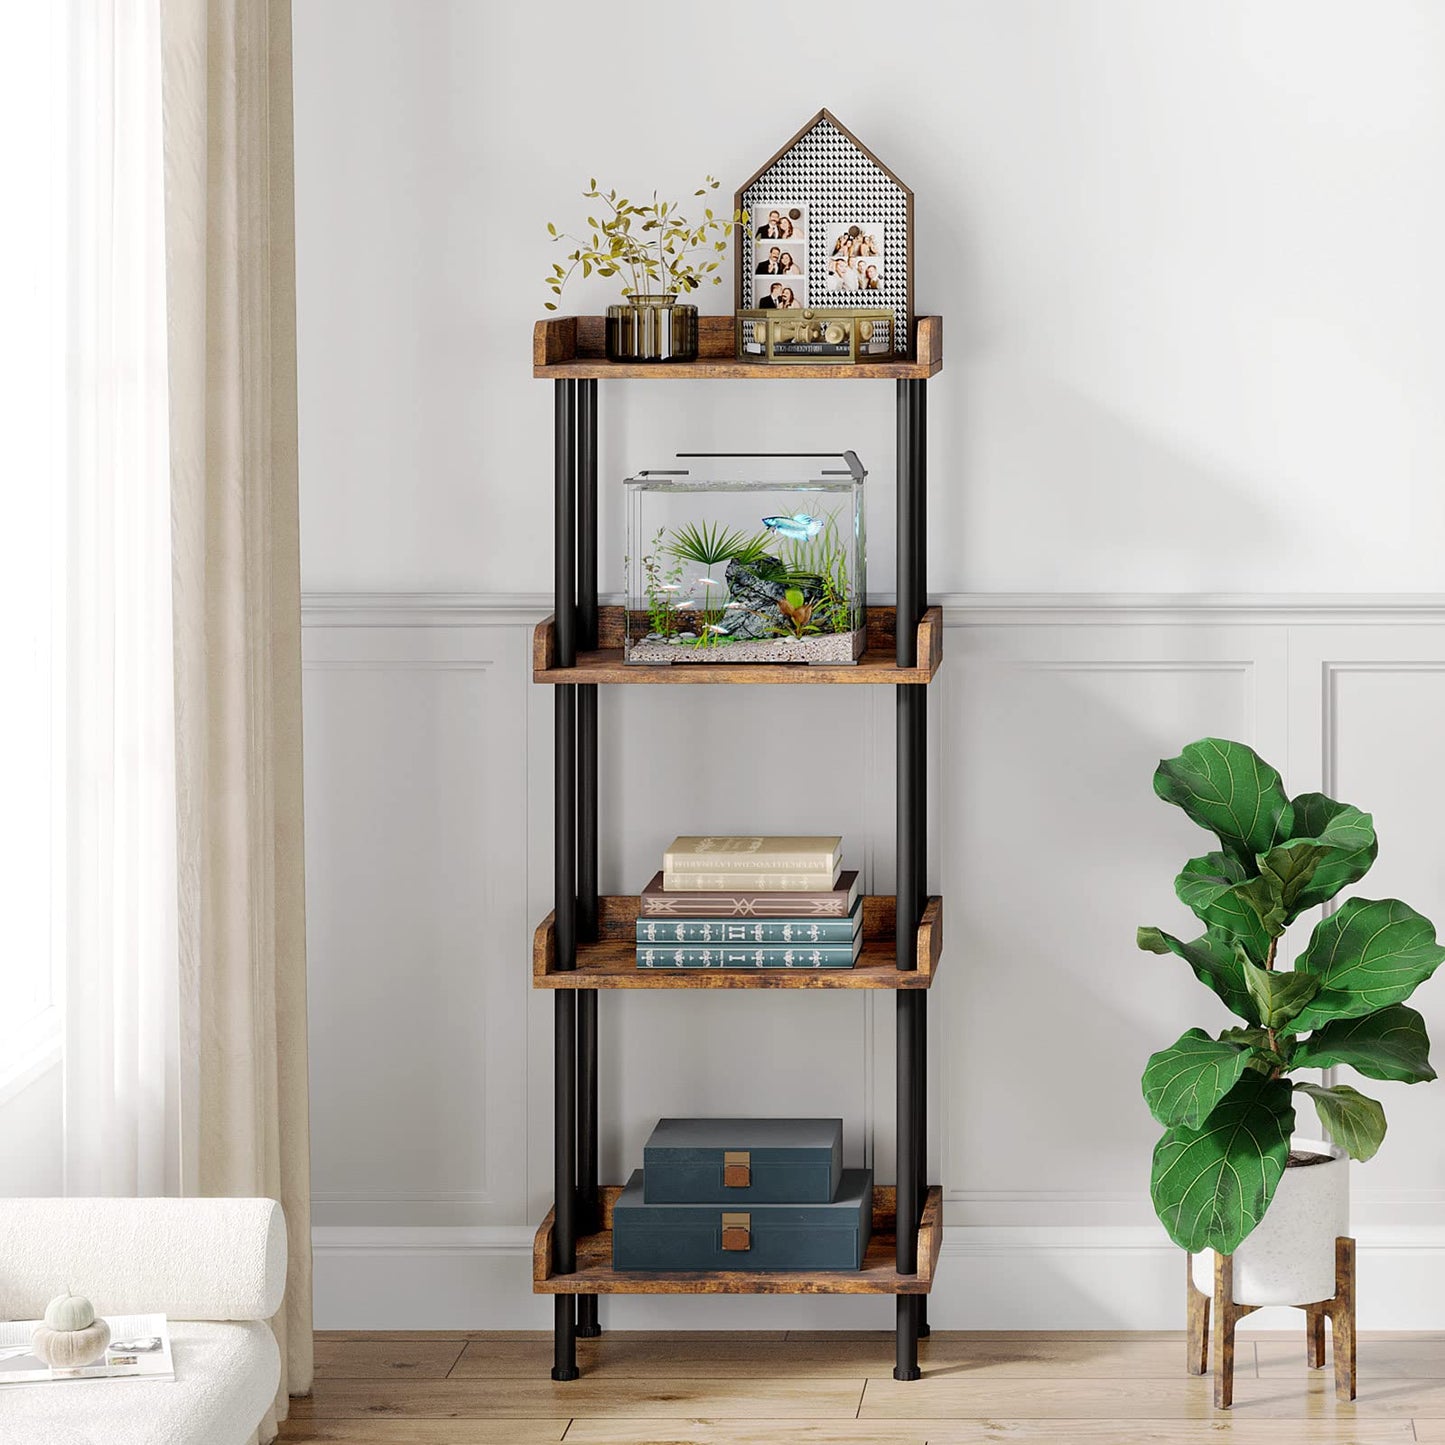 Hosfais Bookcase 4 Tier Bookshelf, Vintage Small Bookshelf for Small Spaces, Wooden Book Shelf Small Bookcase for Living Room Bedroom